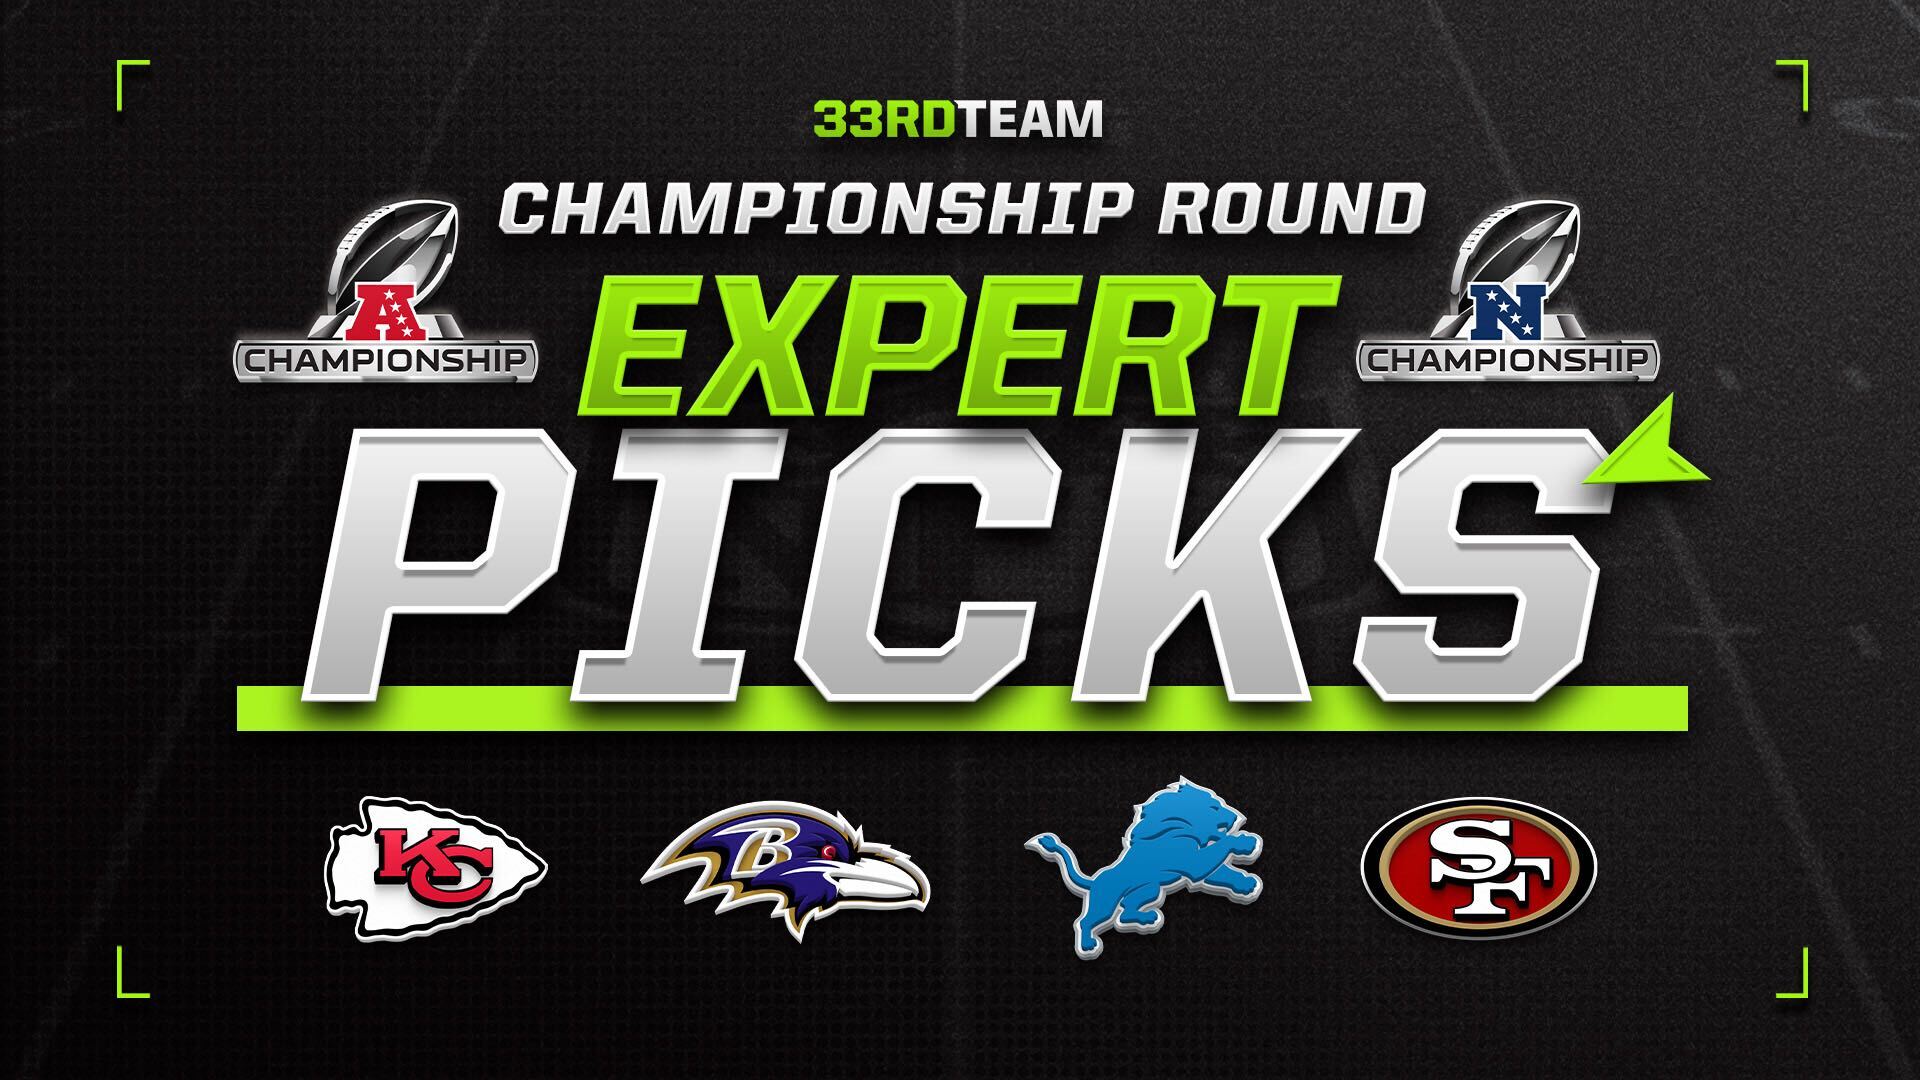 nfl expert picks with logos of the Chiefs, Ravens, Lions and 49ers